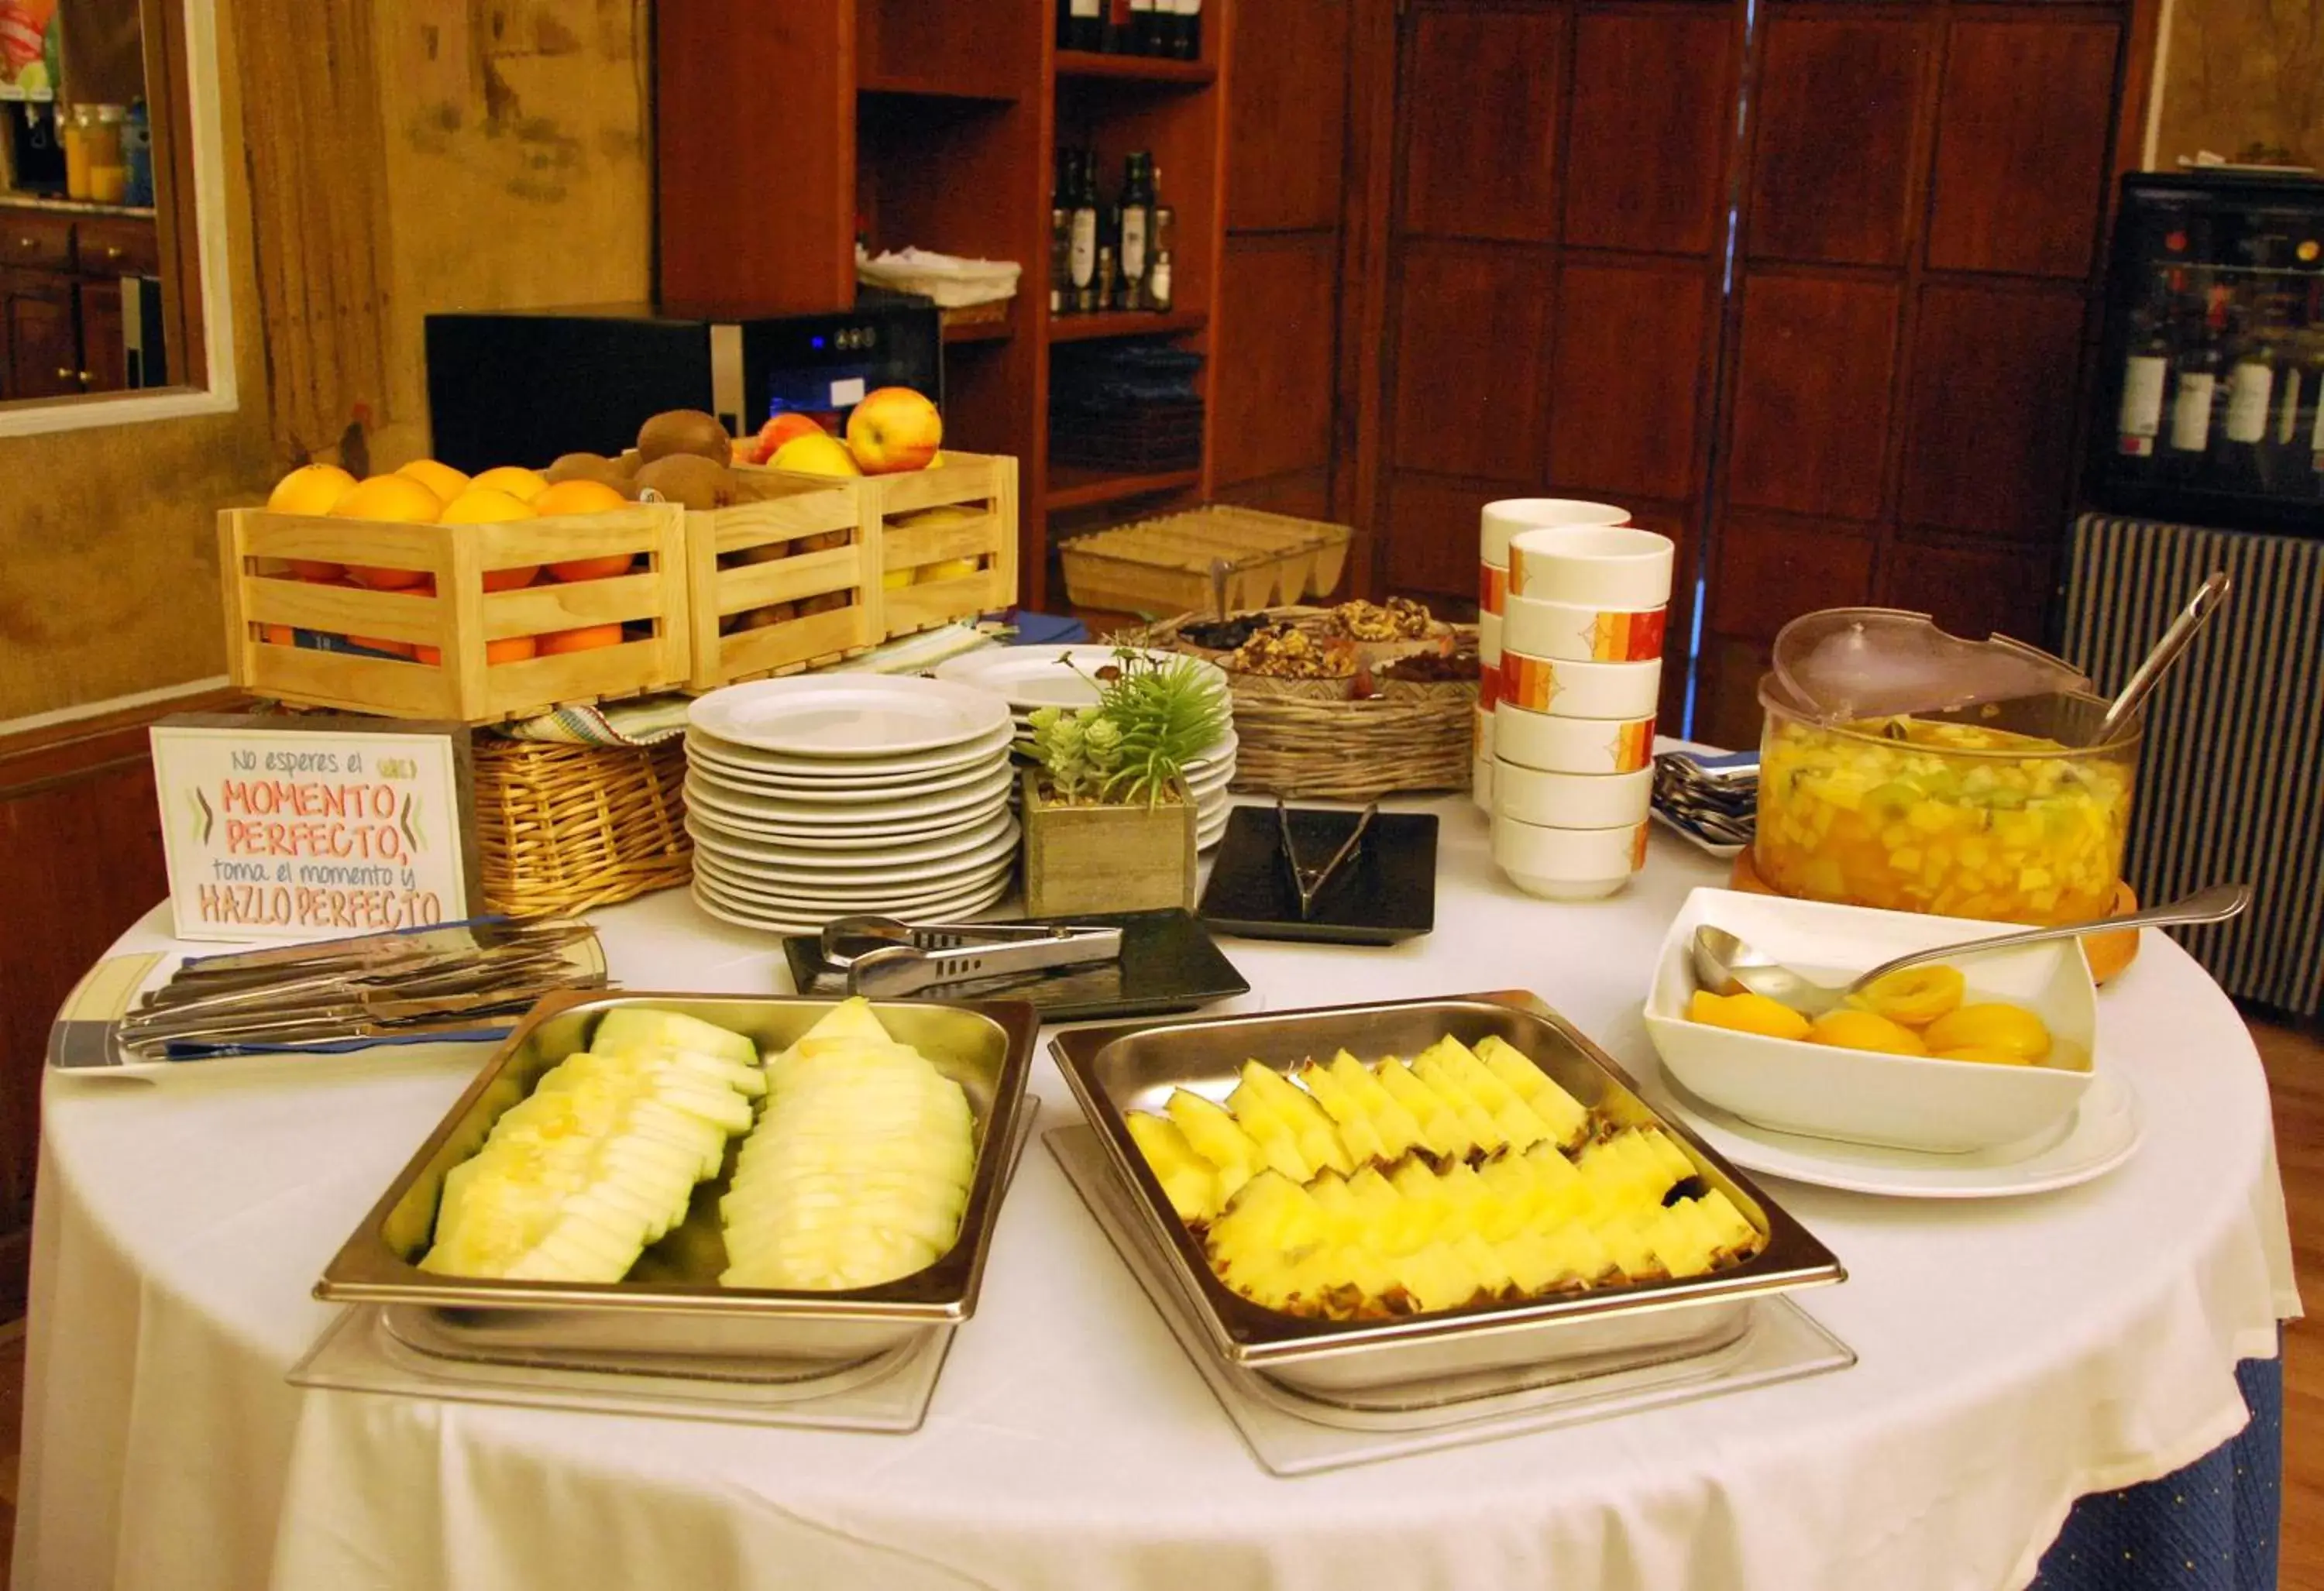 Buffet breakfast in Real Segovia by Recordis Hotels